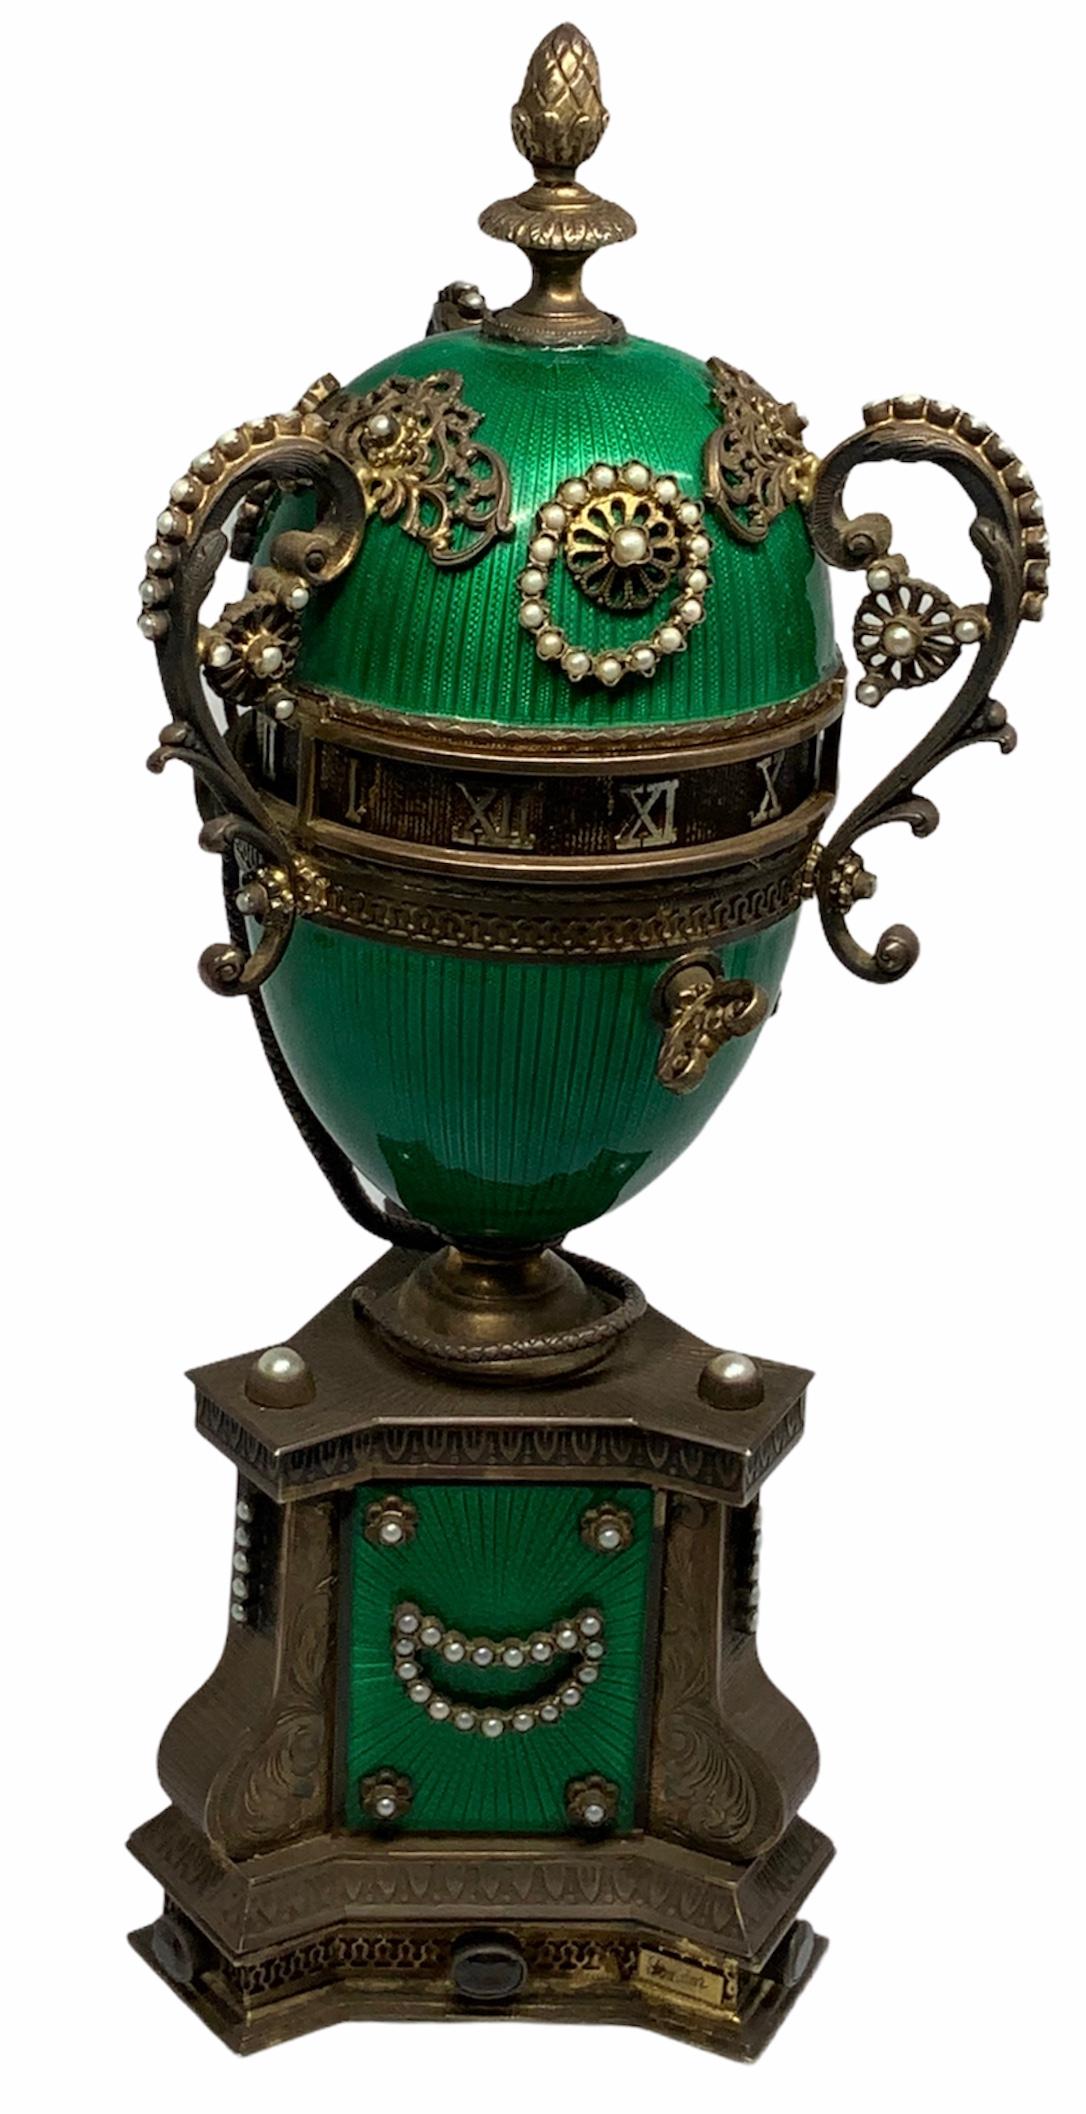 Faberge Style Guilloche Egg Gilt Silver Annular Serpent Clock 5